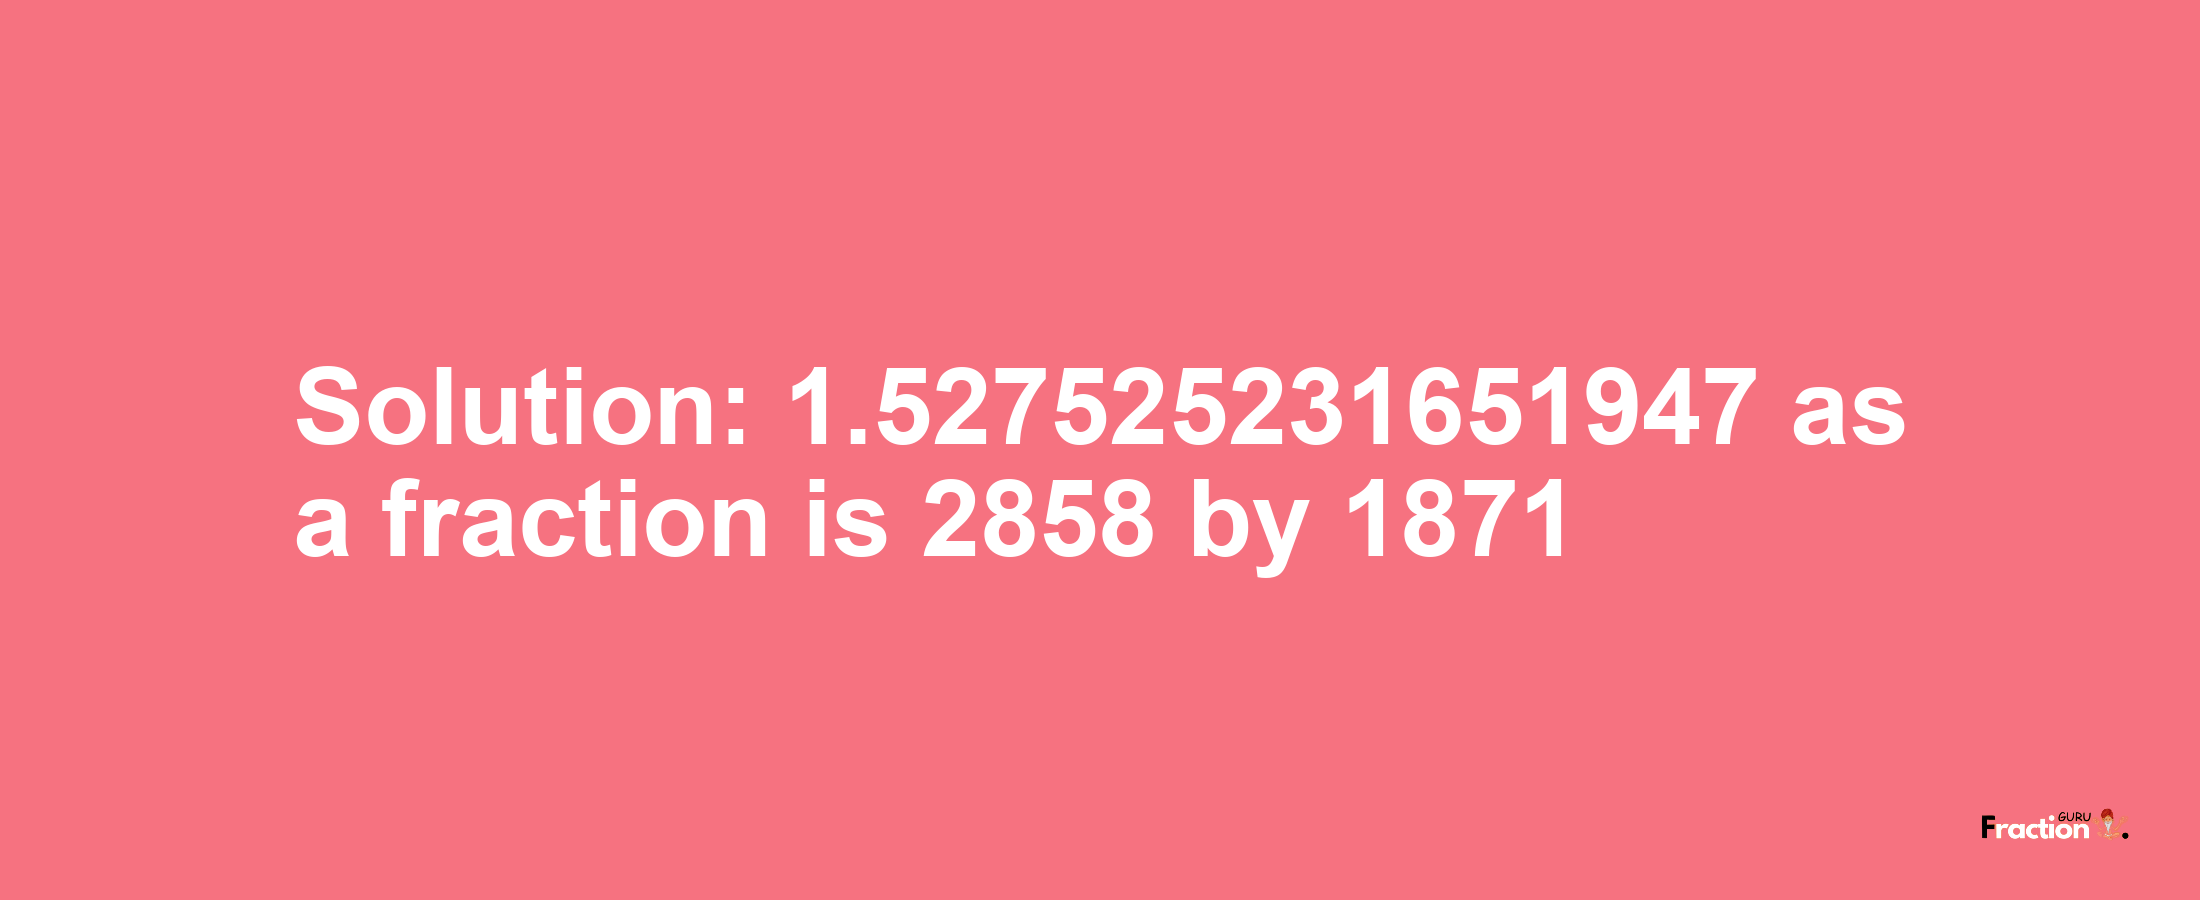 Solution:1.527525231651947 as a fraction is 2858/1871